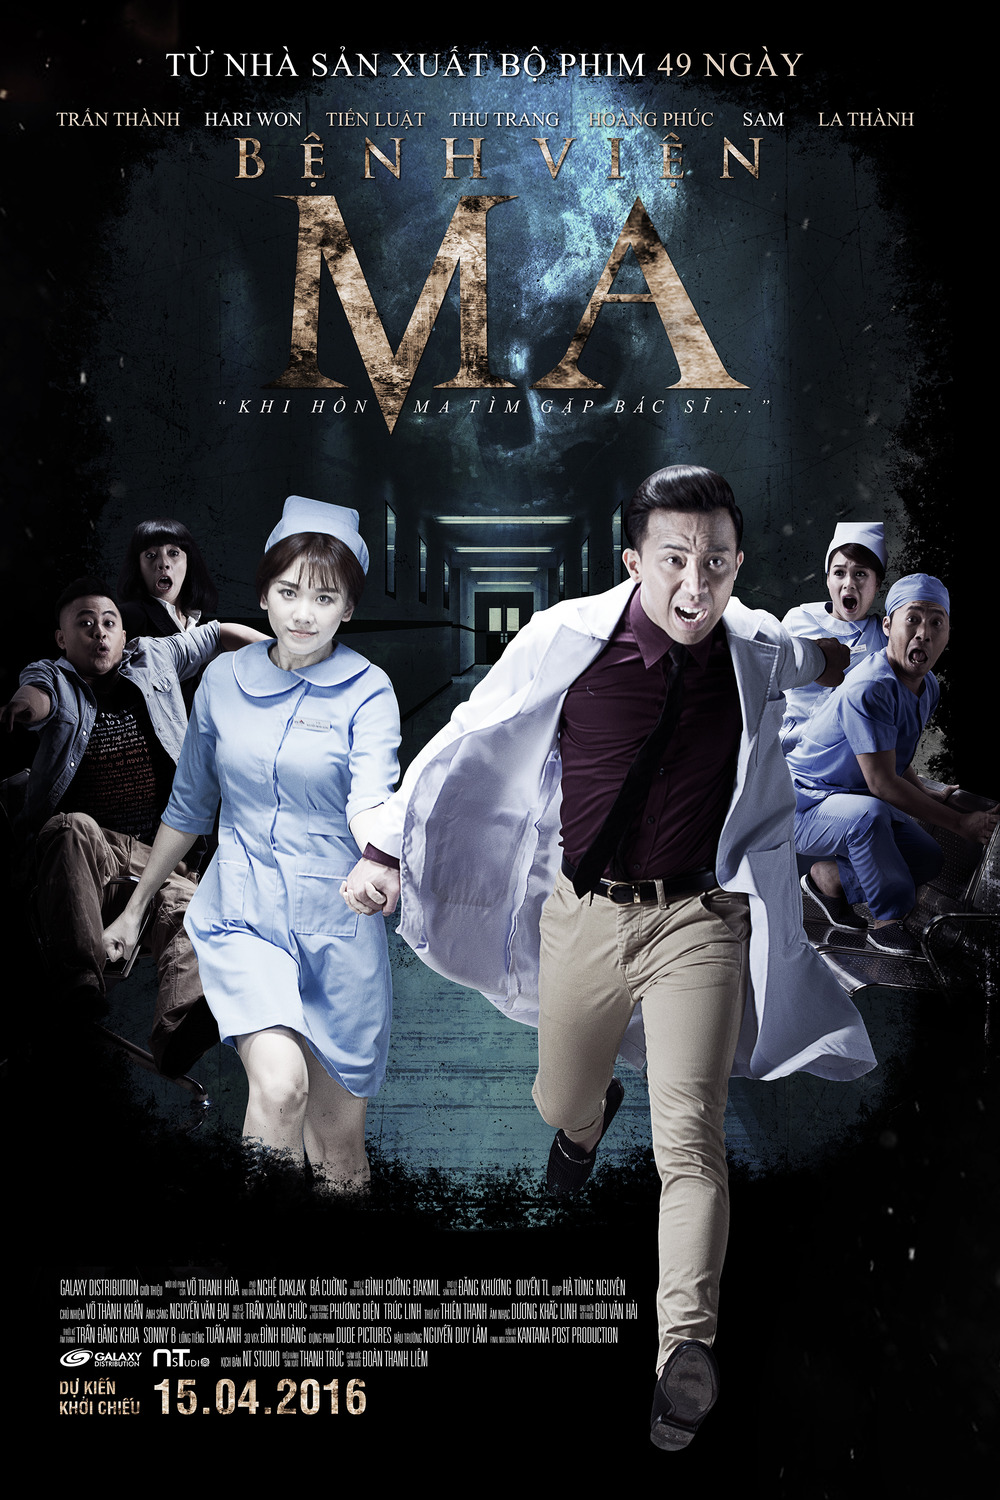 Extra Large Movie Poster Image for Benh vien ma 